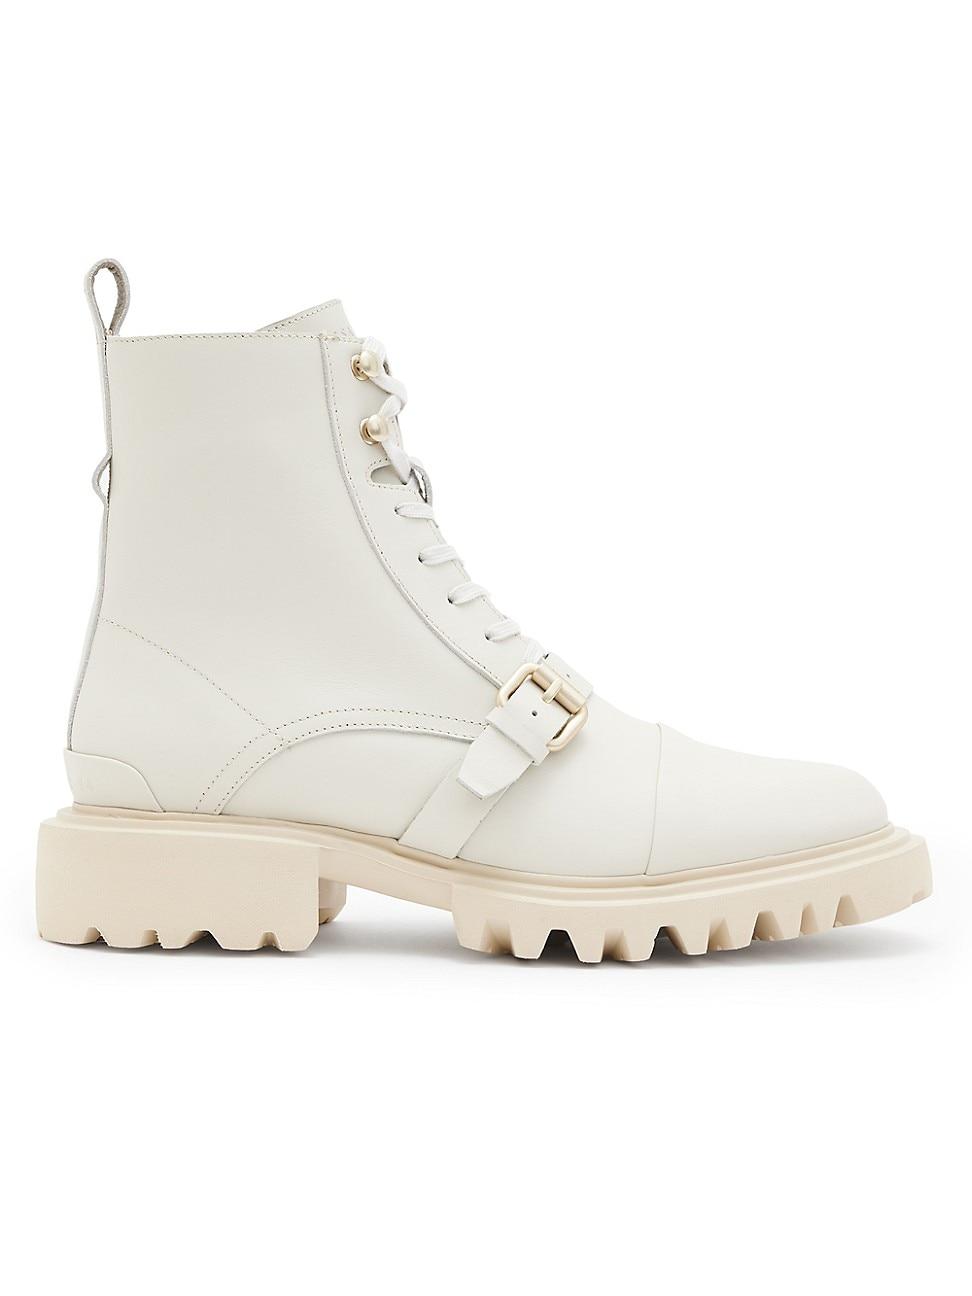 AllSaints Tori Leather Lug-sole Boots in Natural | Lyst